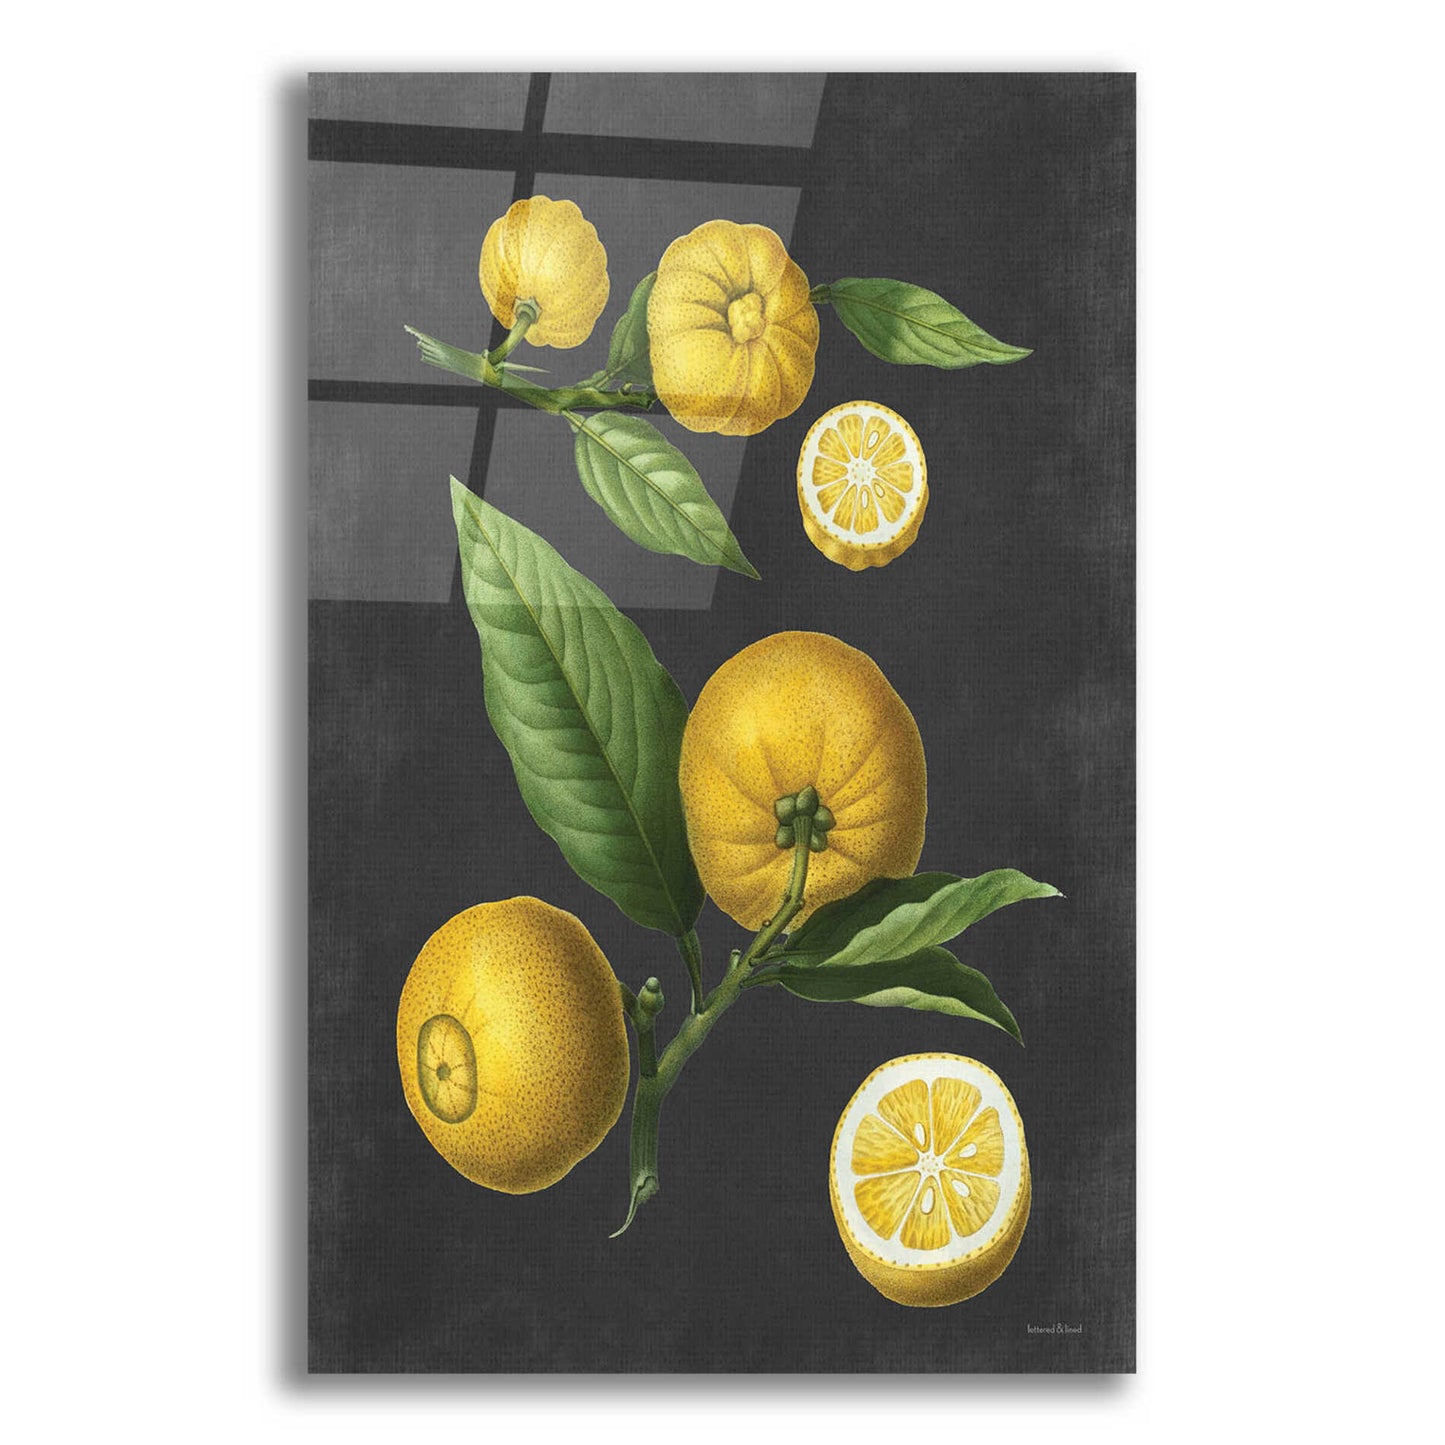 Epic Art 'Lemon Citrus' by lettered & lined, Acrylic Glass Wall Art